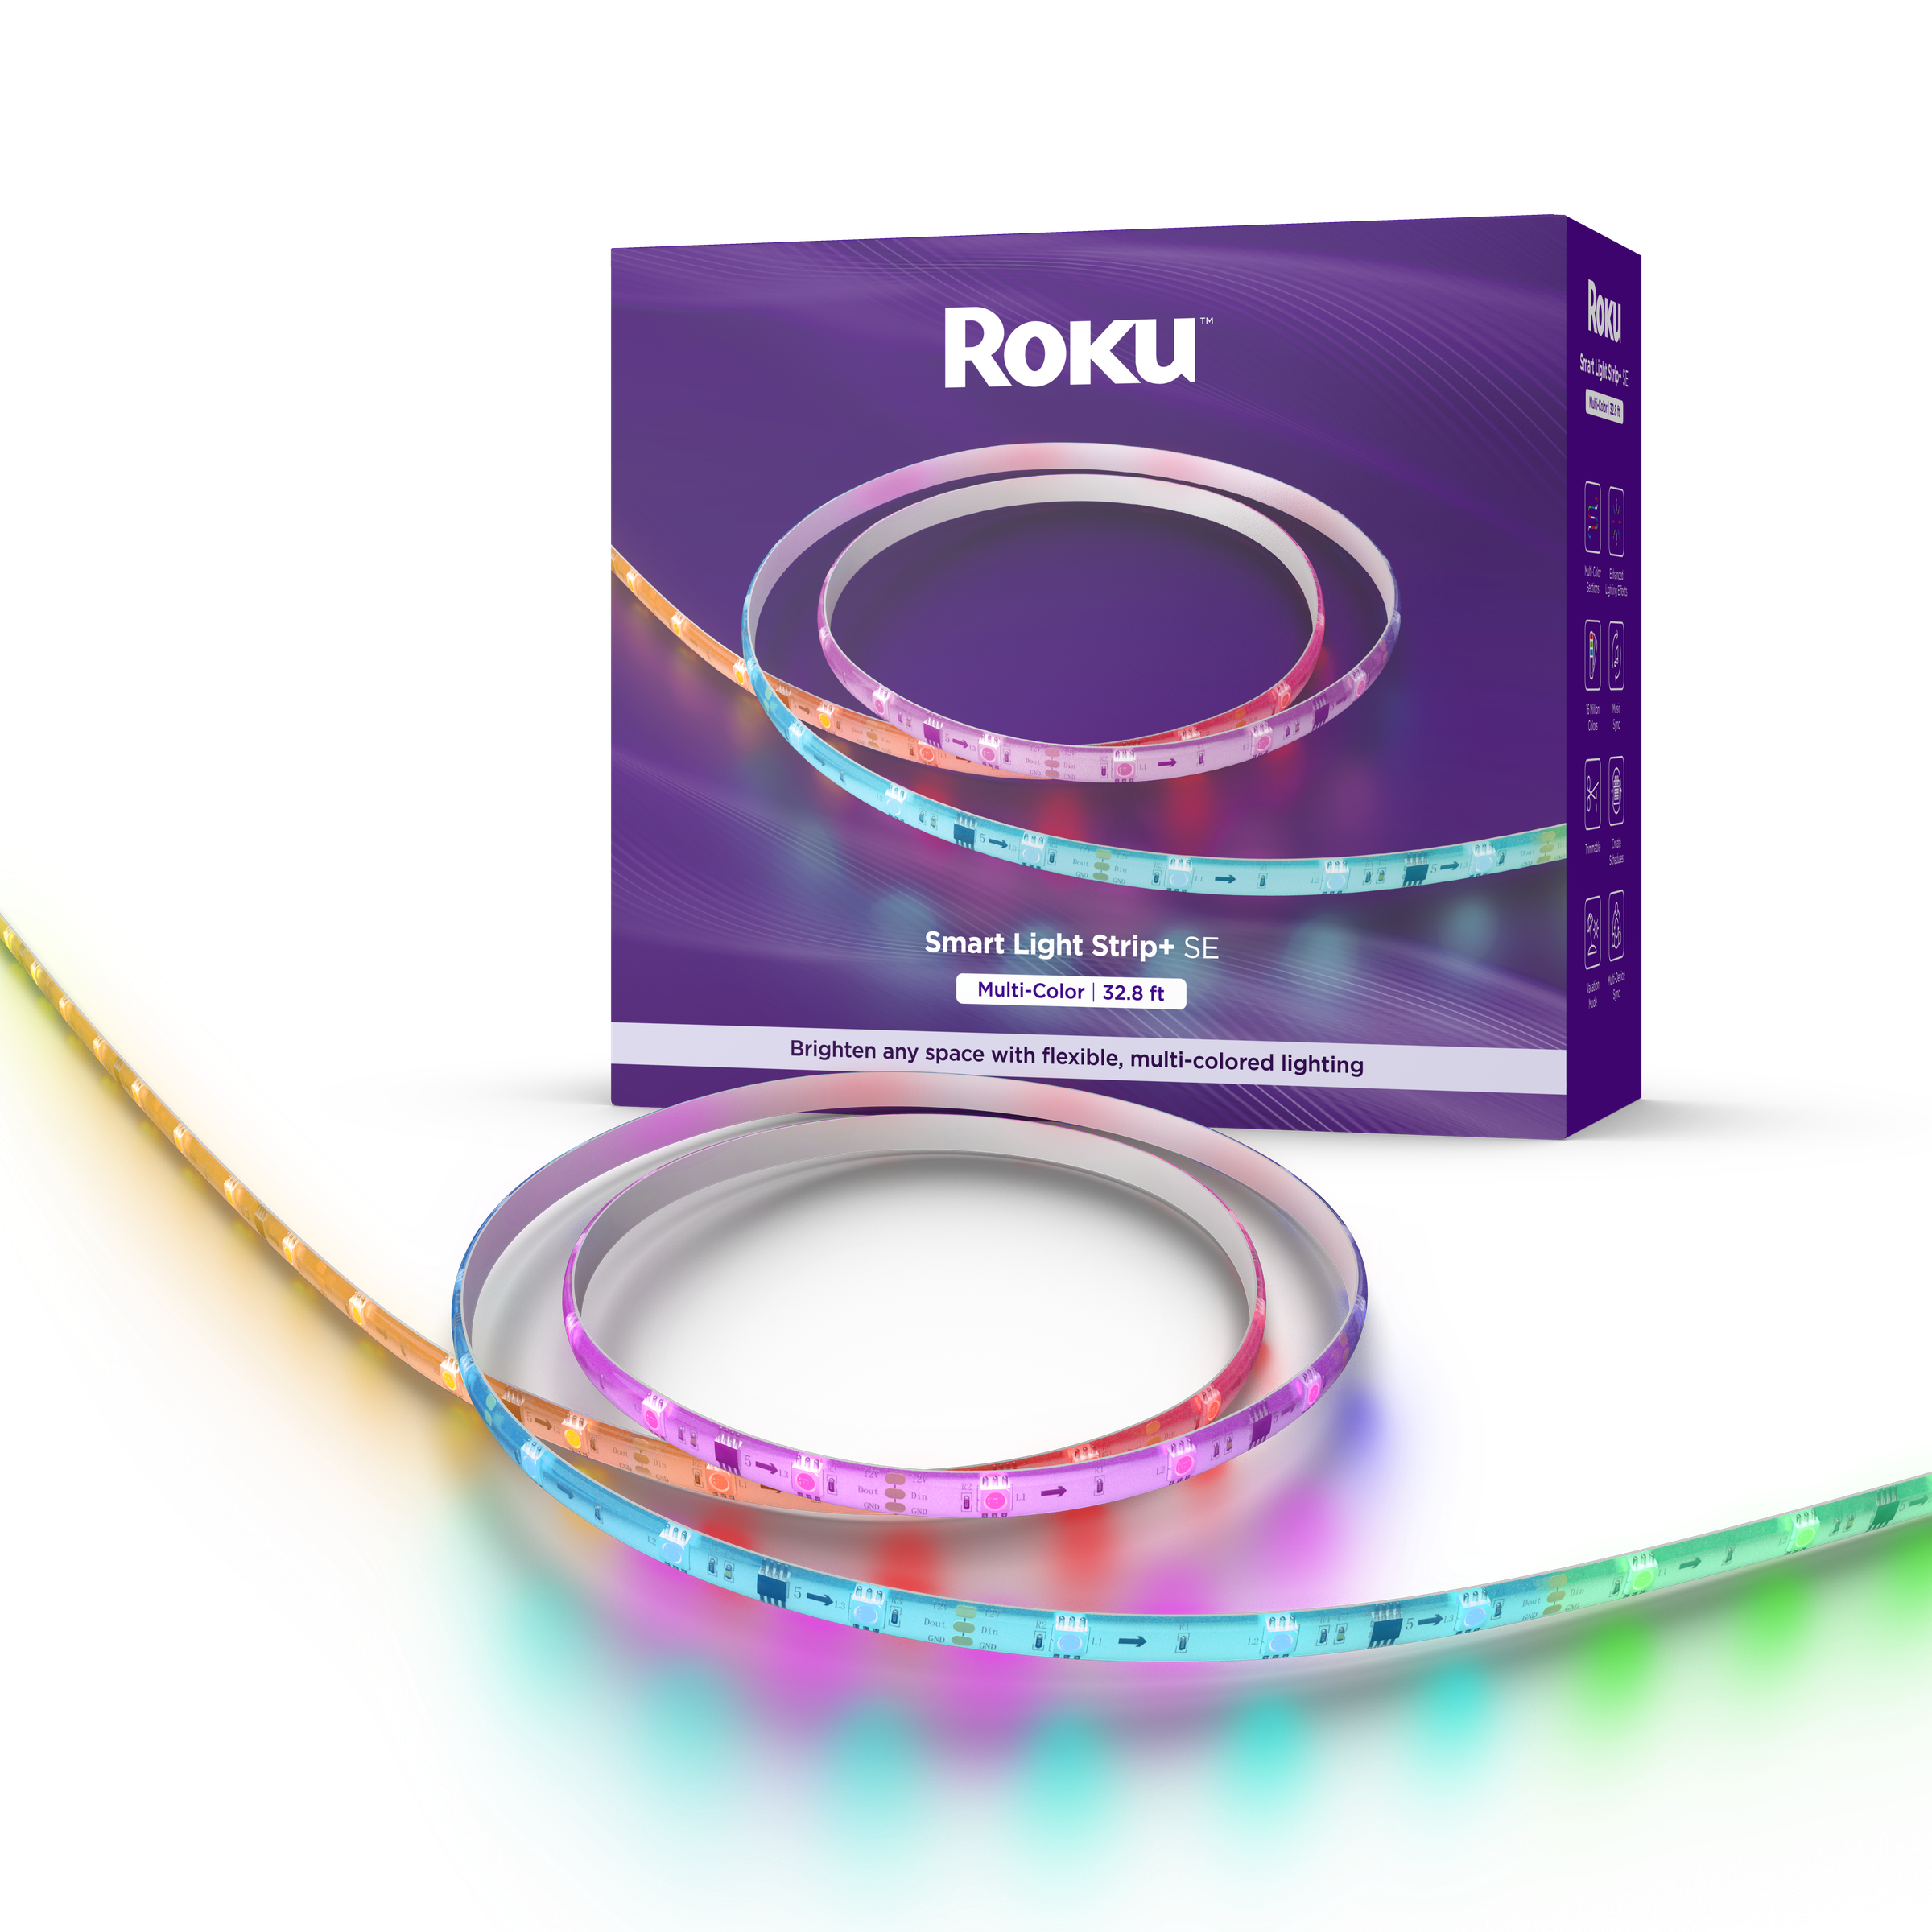 The Roku Smart Light Strip Plus SE can display multiple colors at once.